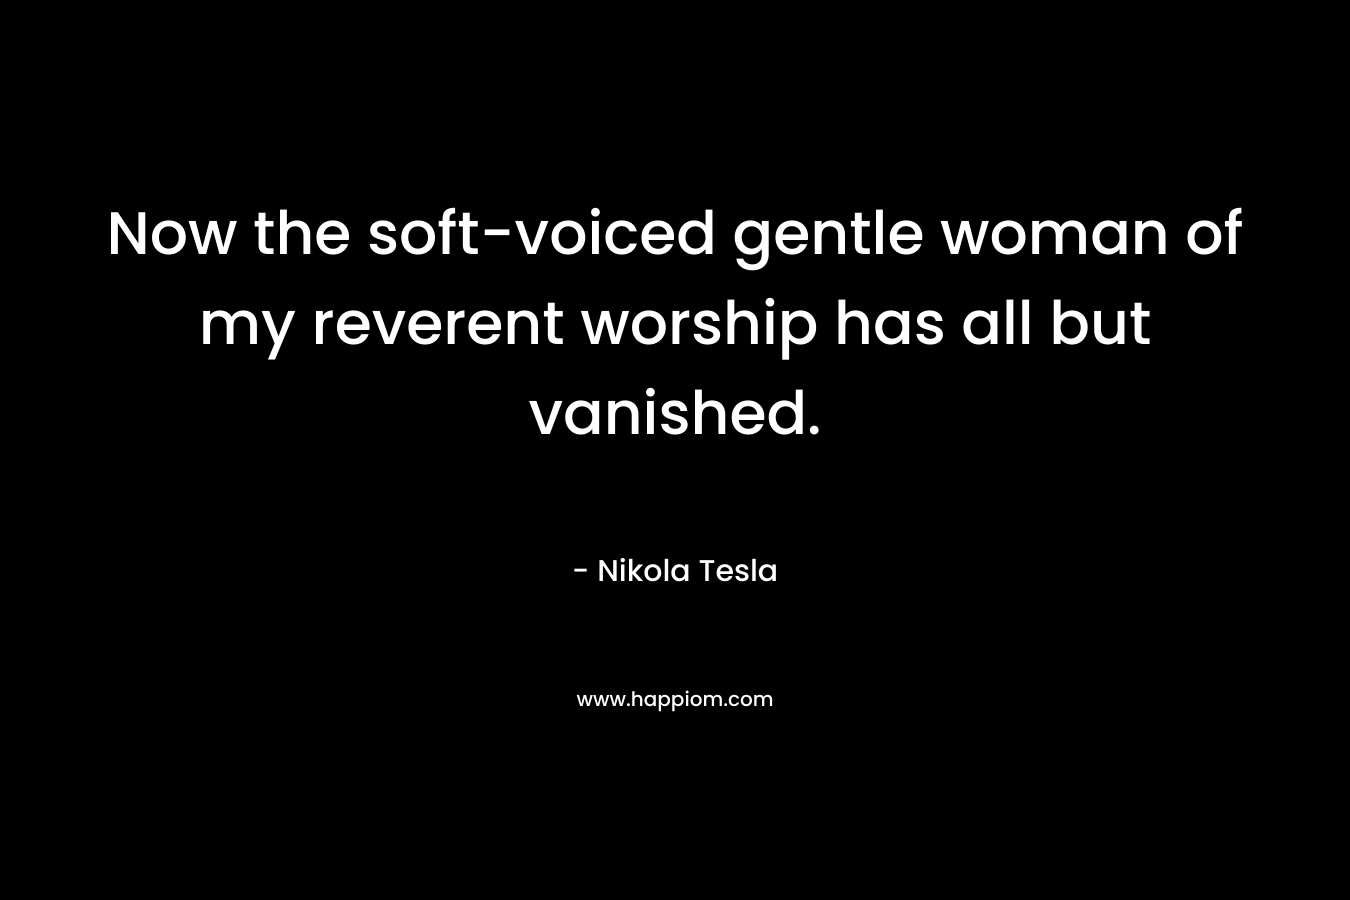 Now the soft-voiced gentle woman of my reverent worship has all but vanished. – Nikola Tesla